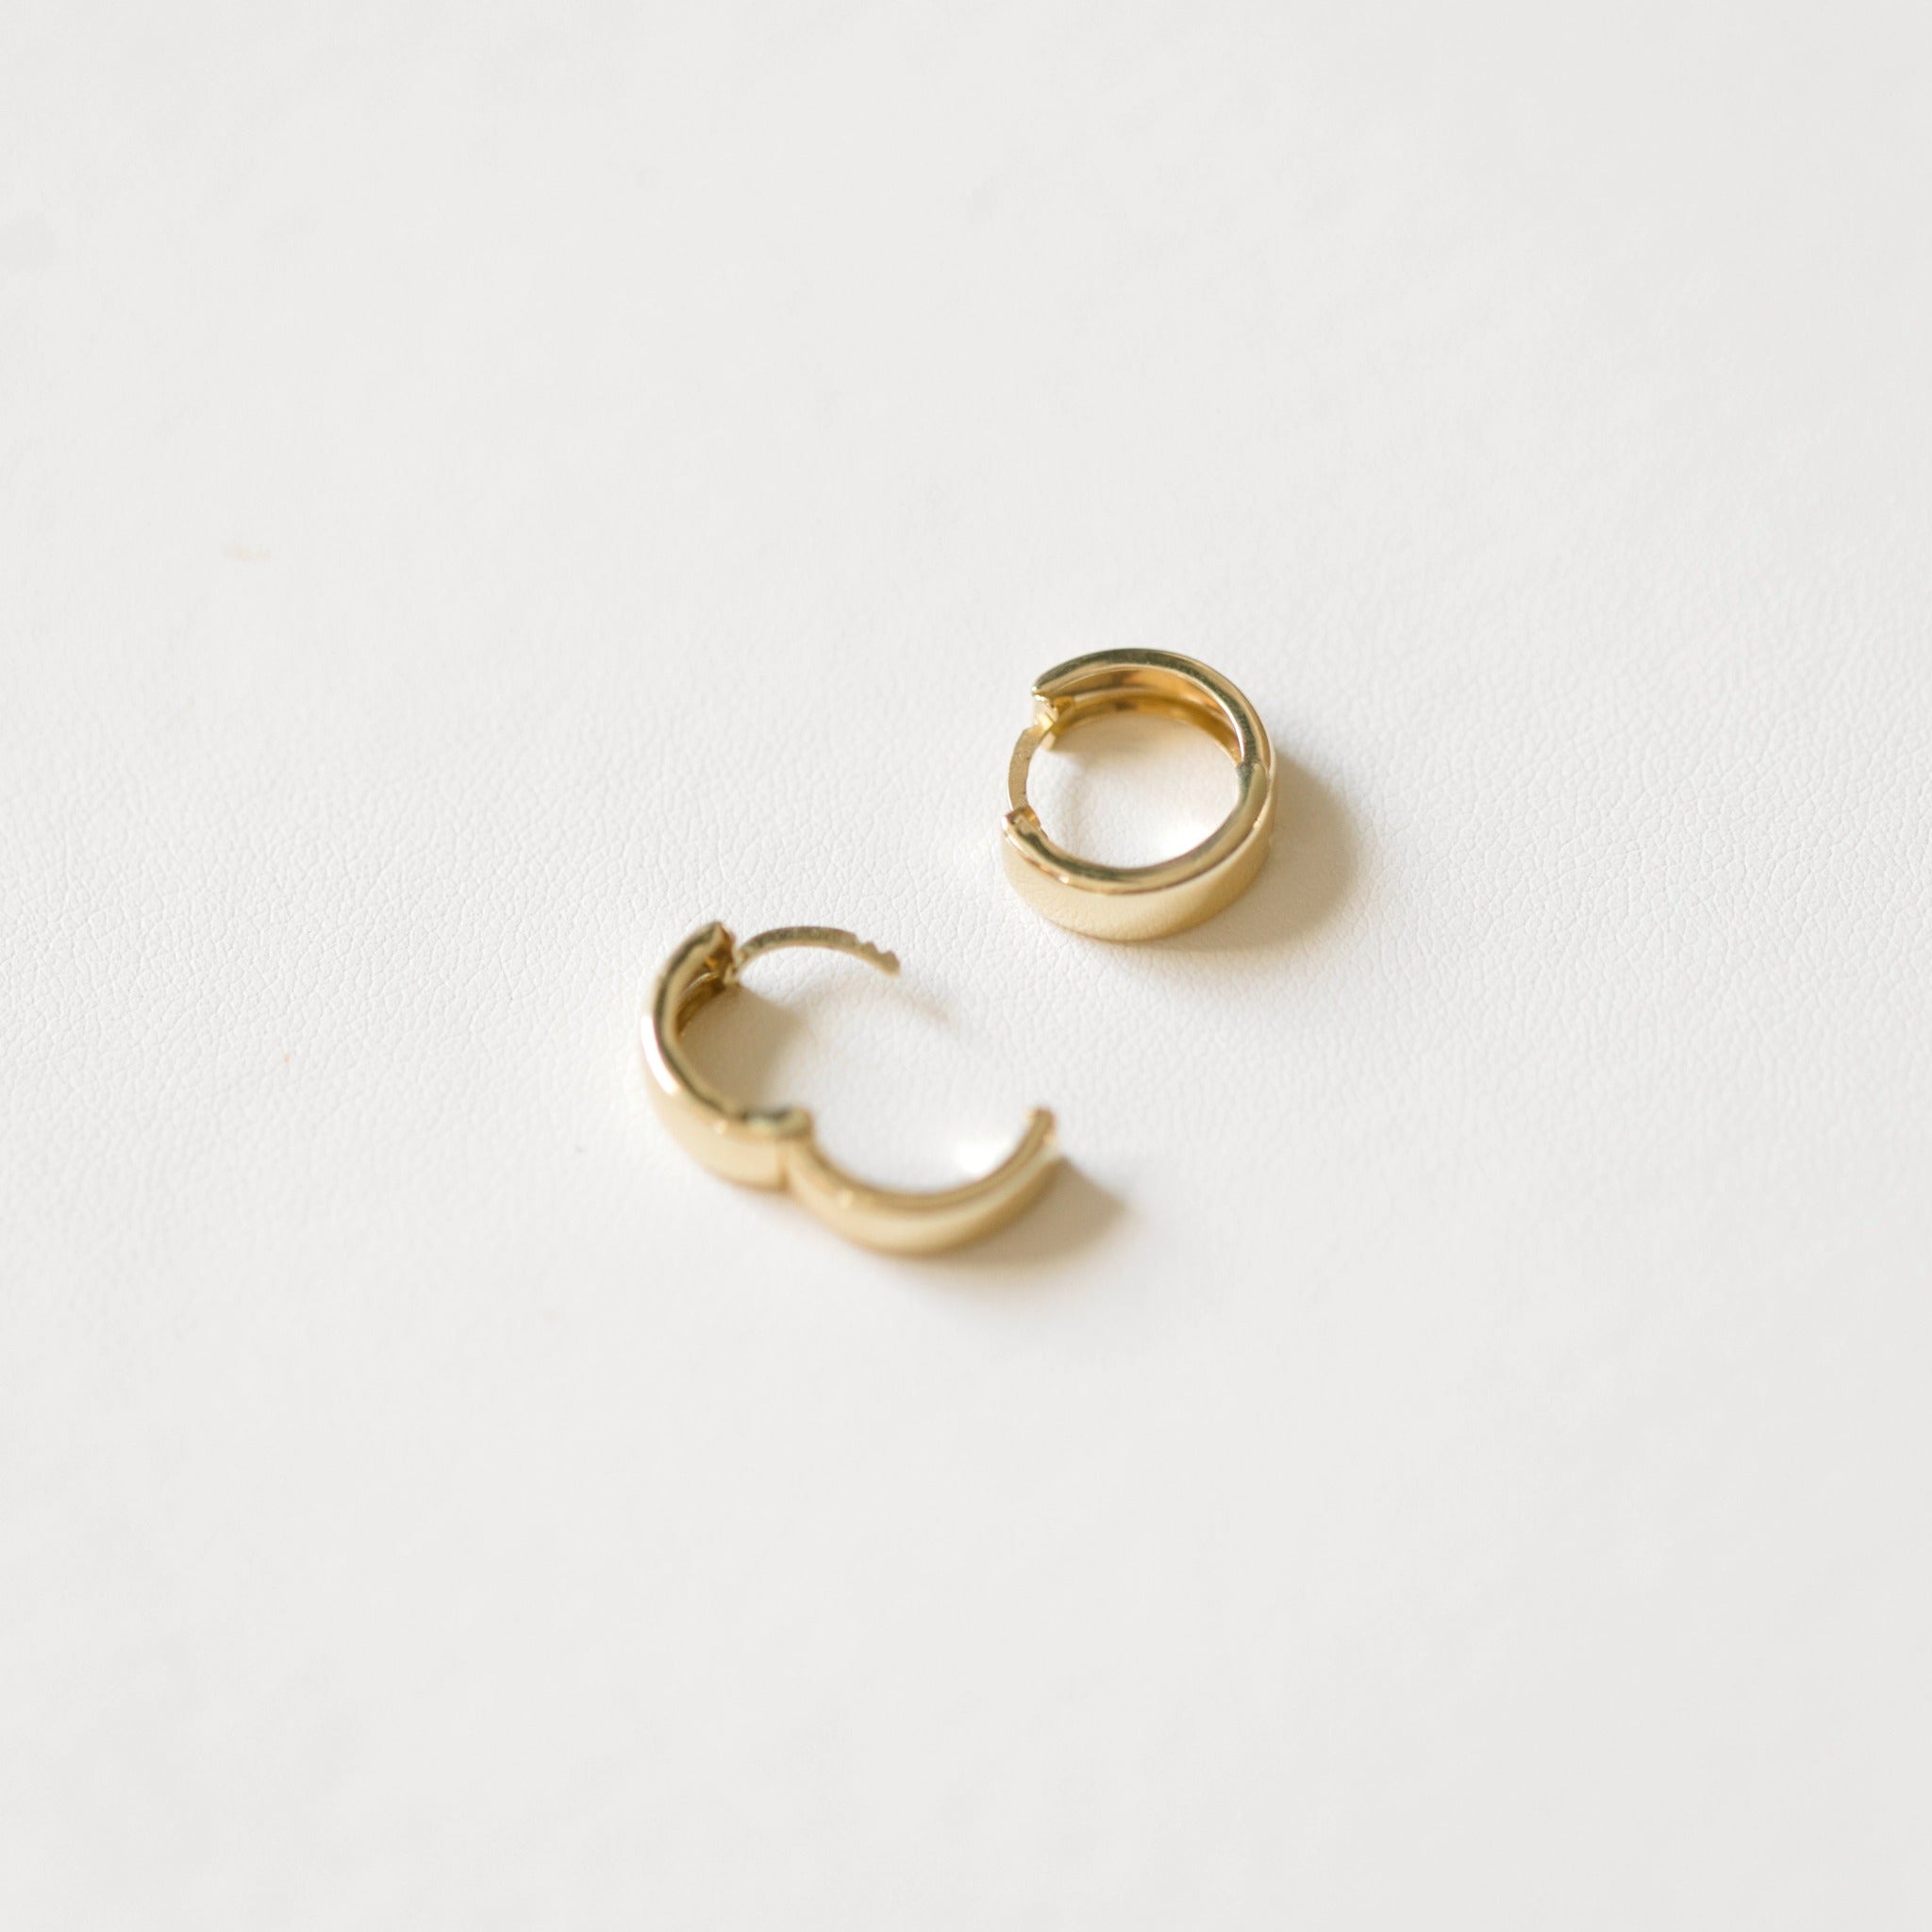 These gold hoop earrings click on and off your ear easily. Simple and elegant hoops look solid and heavy, but are hollow.